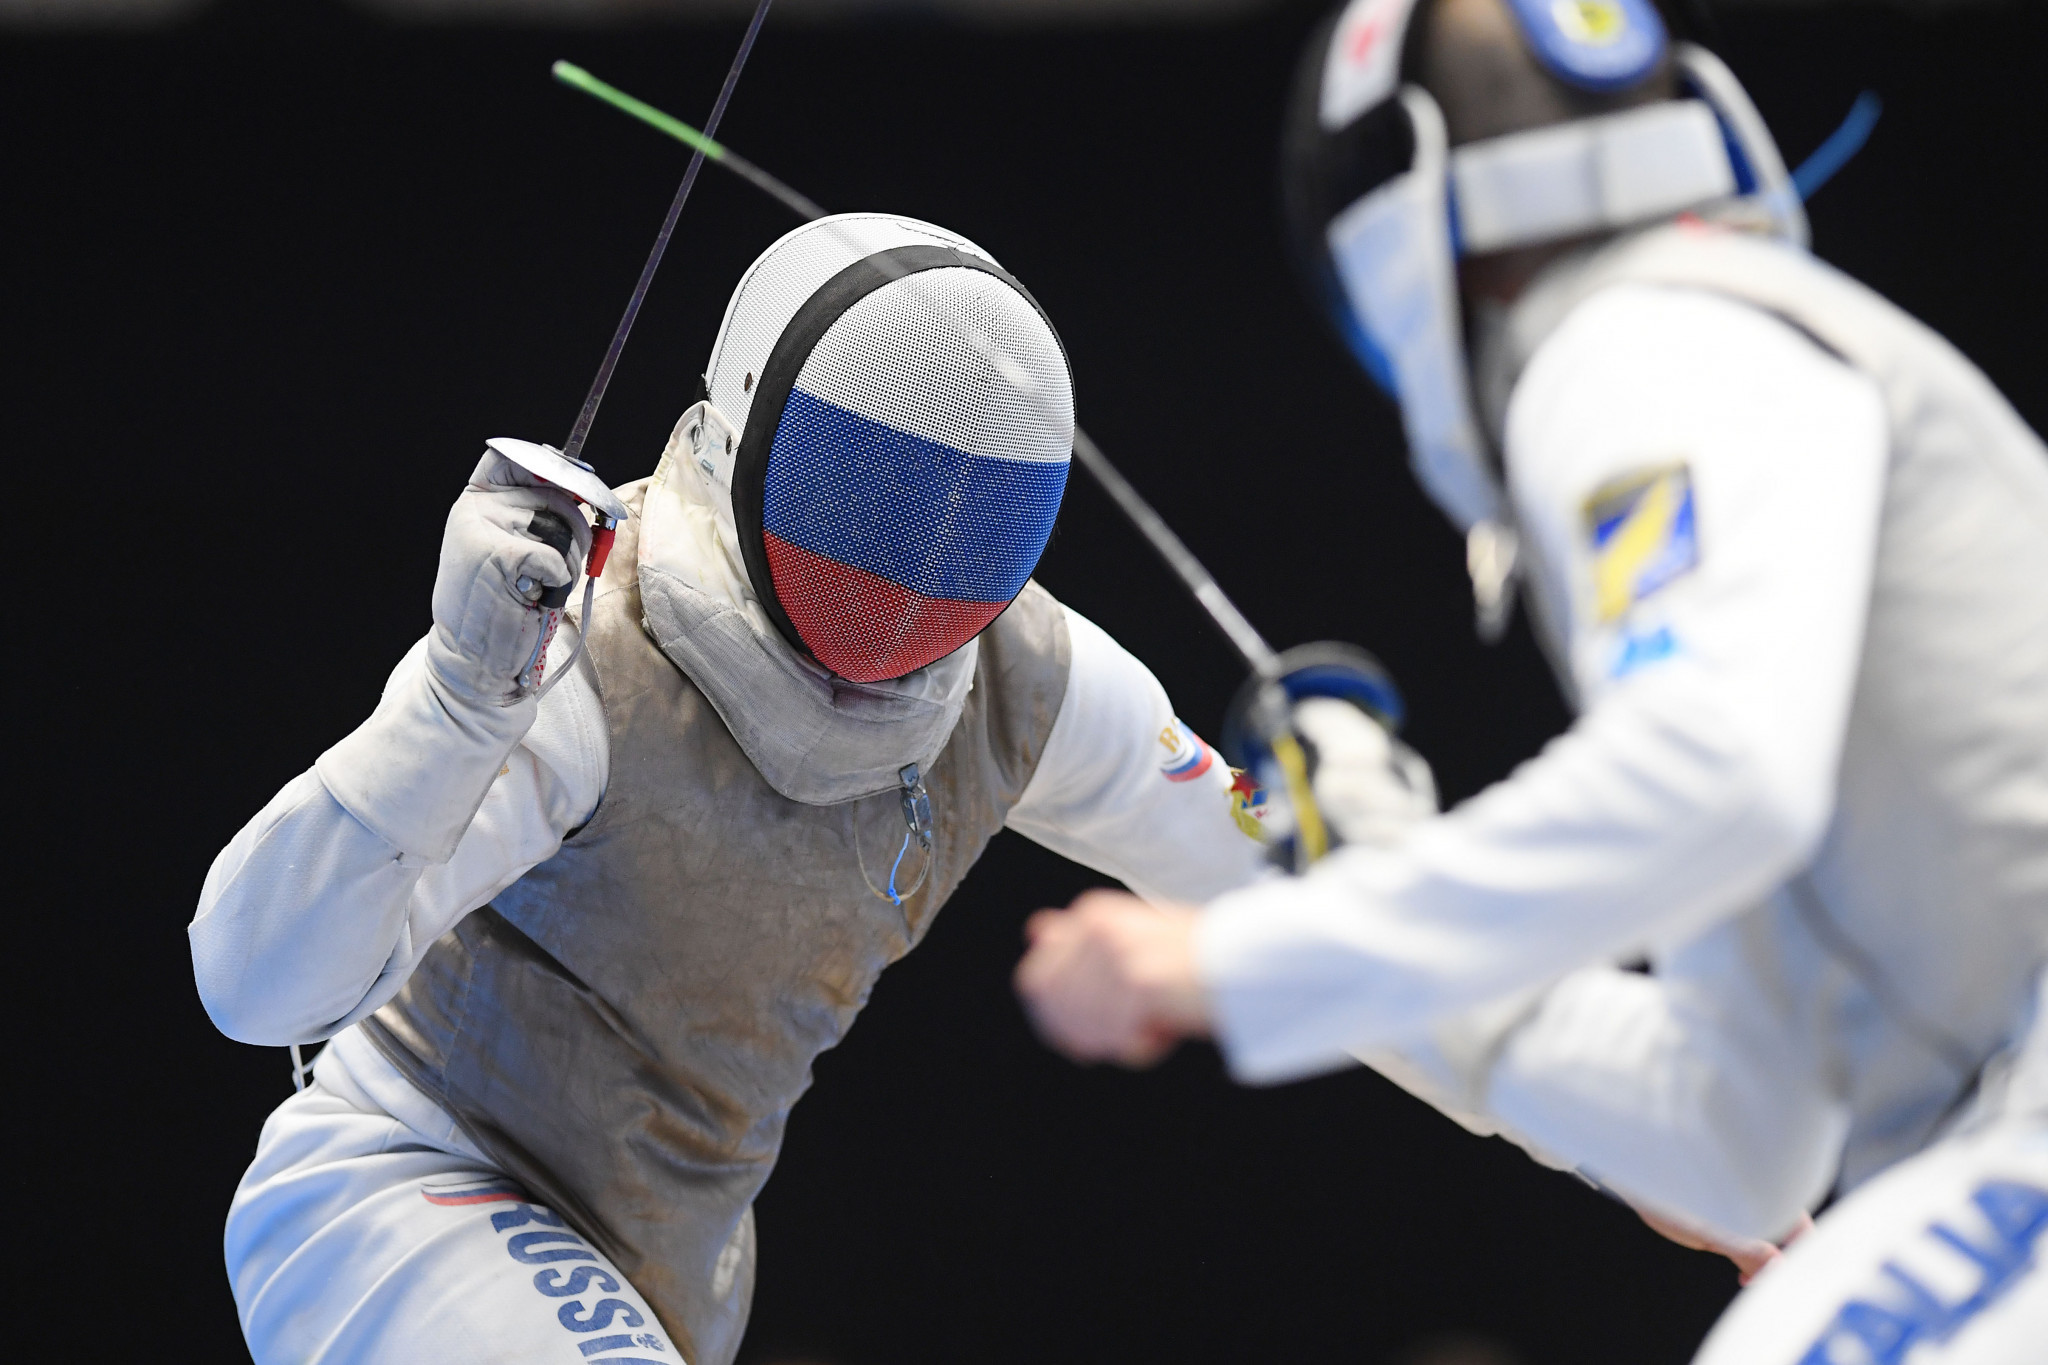 Russian and Belarusian fencers cannot compete at the European Games, and the FIE has stripped individual events of their Olympic qualifying status ©Getty Images